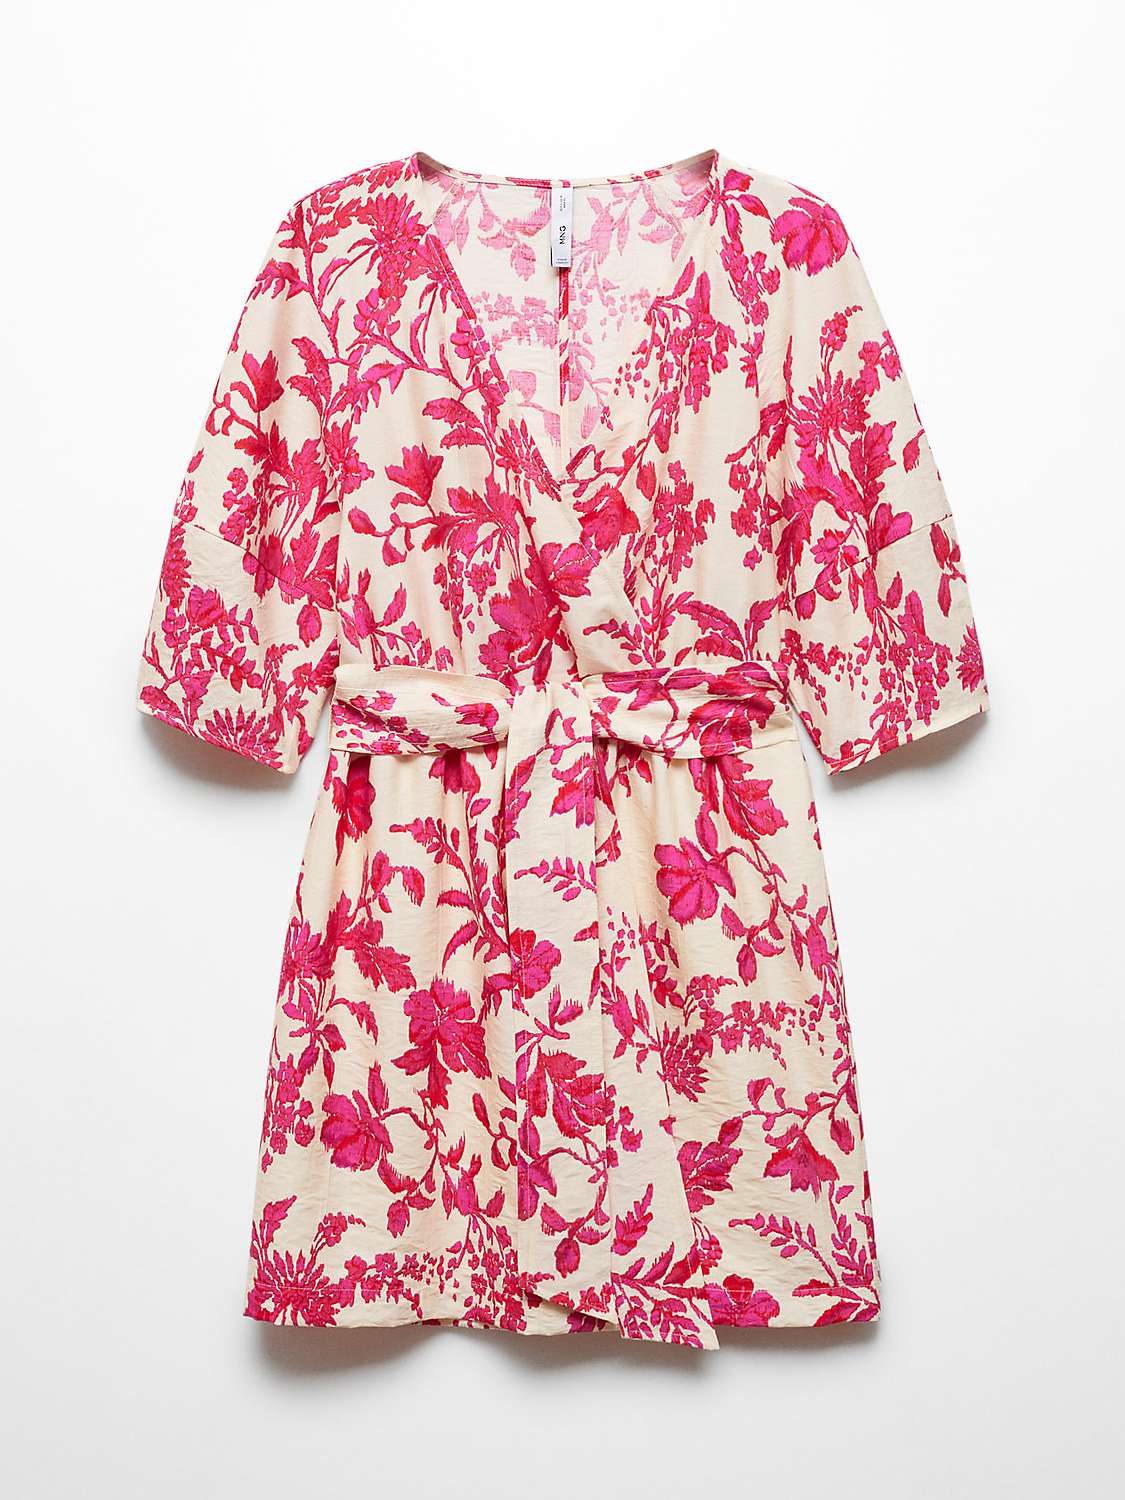 Buy Mango Wally Floral Wrap Dress, Red Online at johnlewis.com